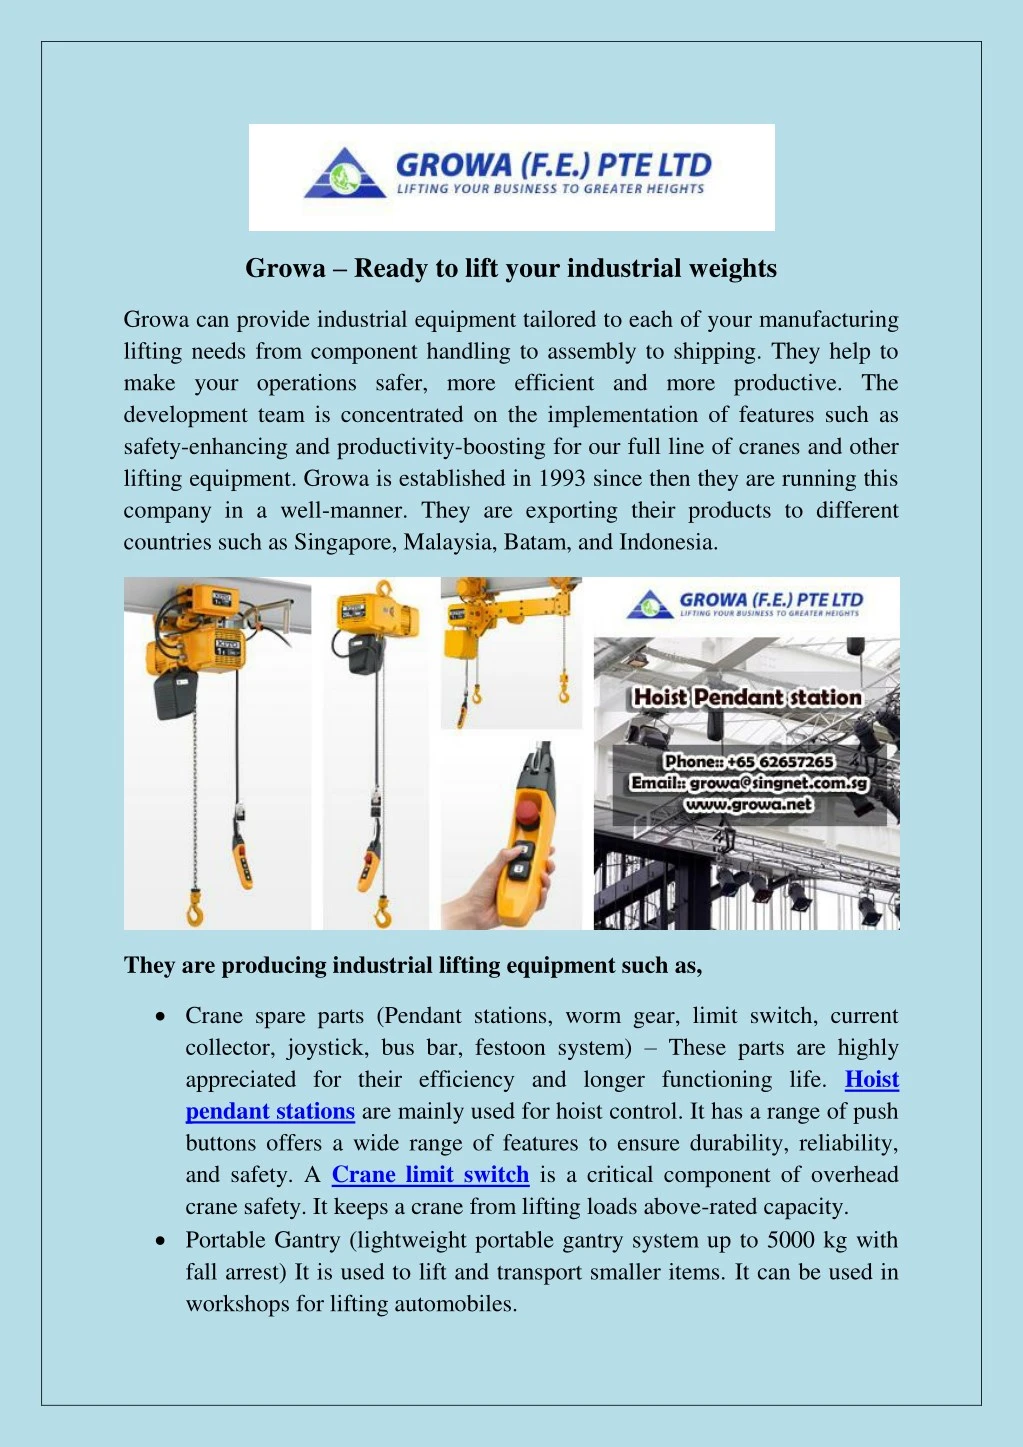 growa ready to lift your industrial weights